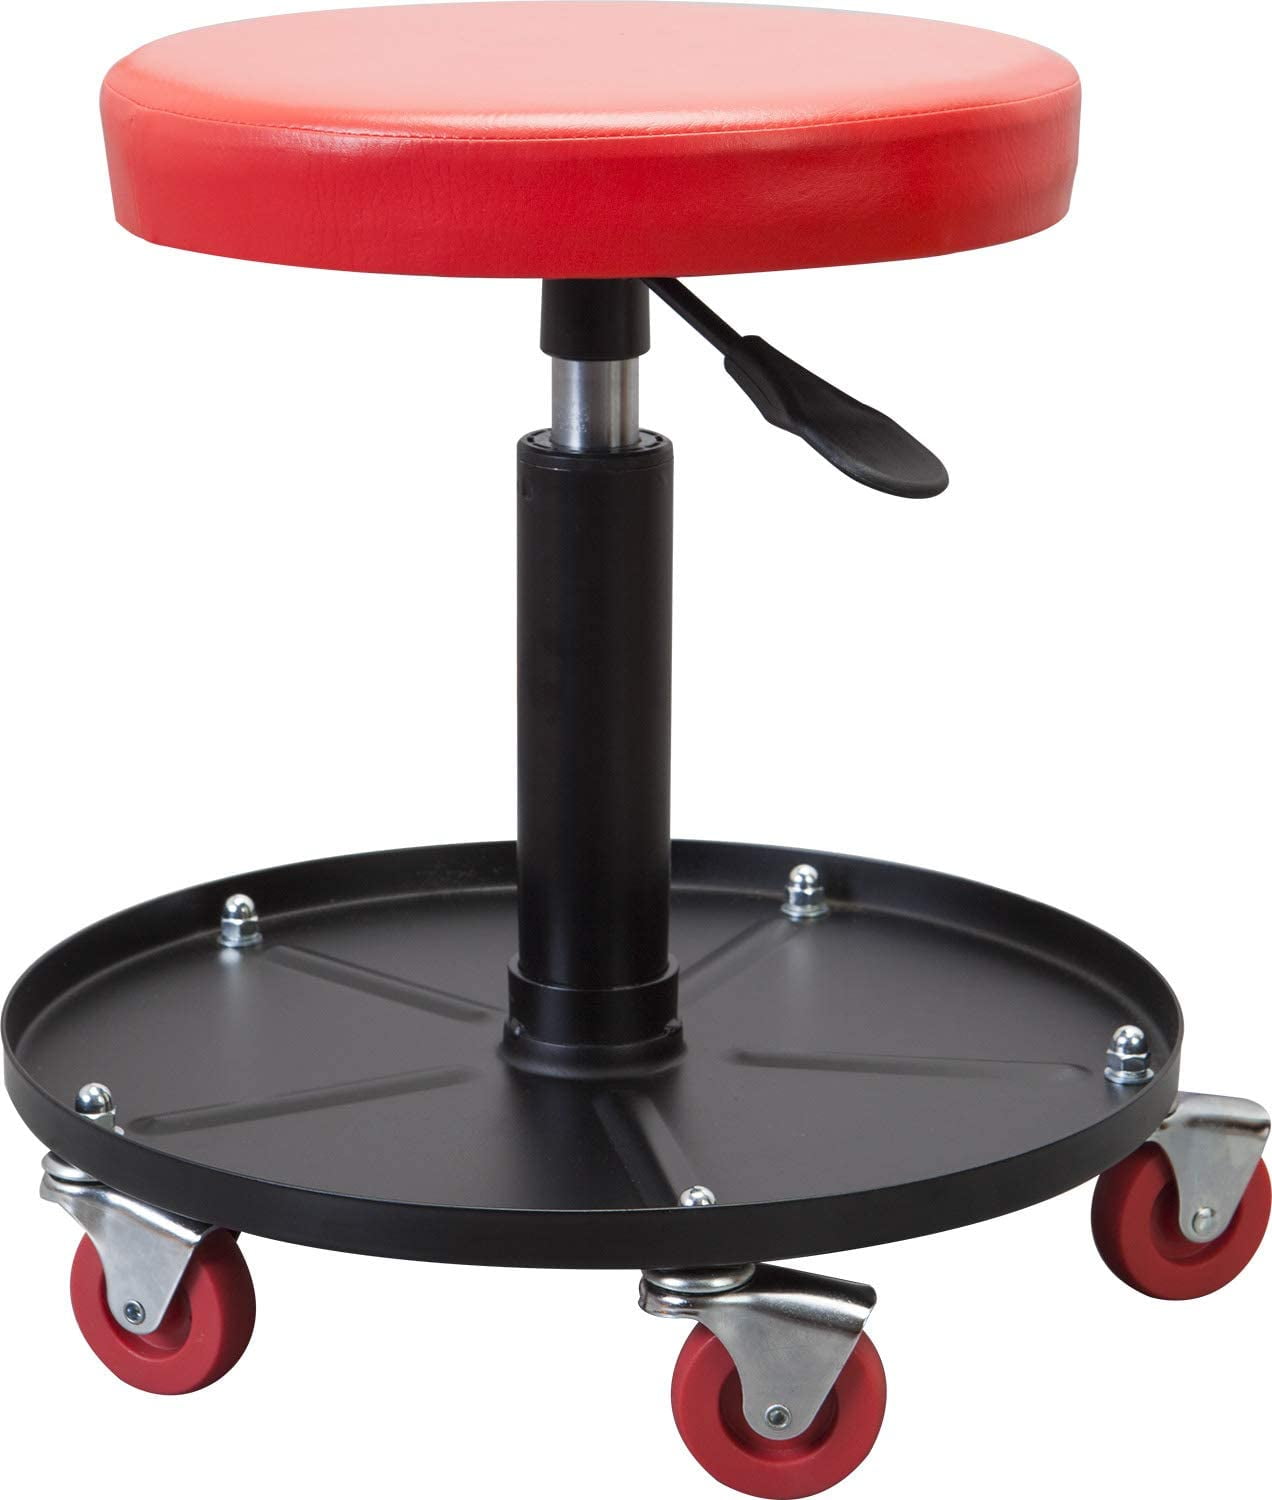 Padded Mechanic Stool with Tool Tray Torin Big Red Rolling Creeper Garage/Shop Seat Red 